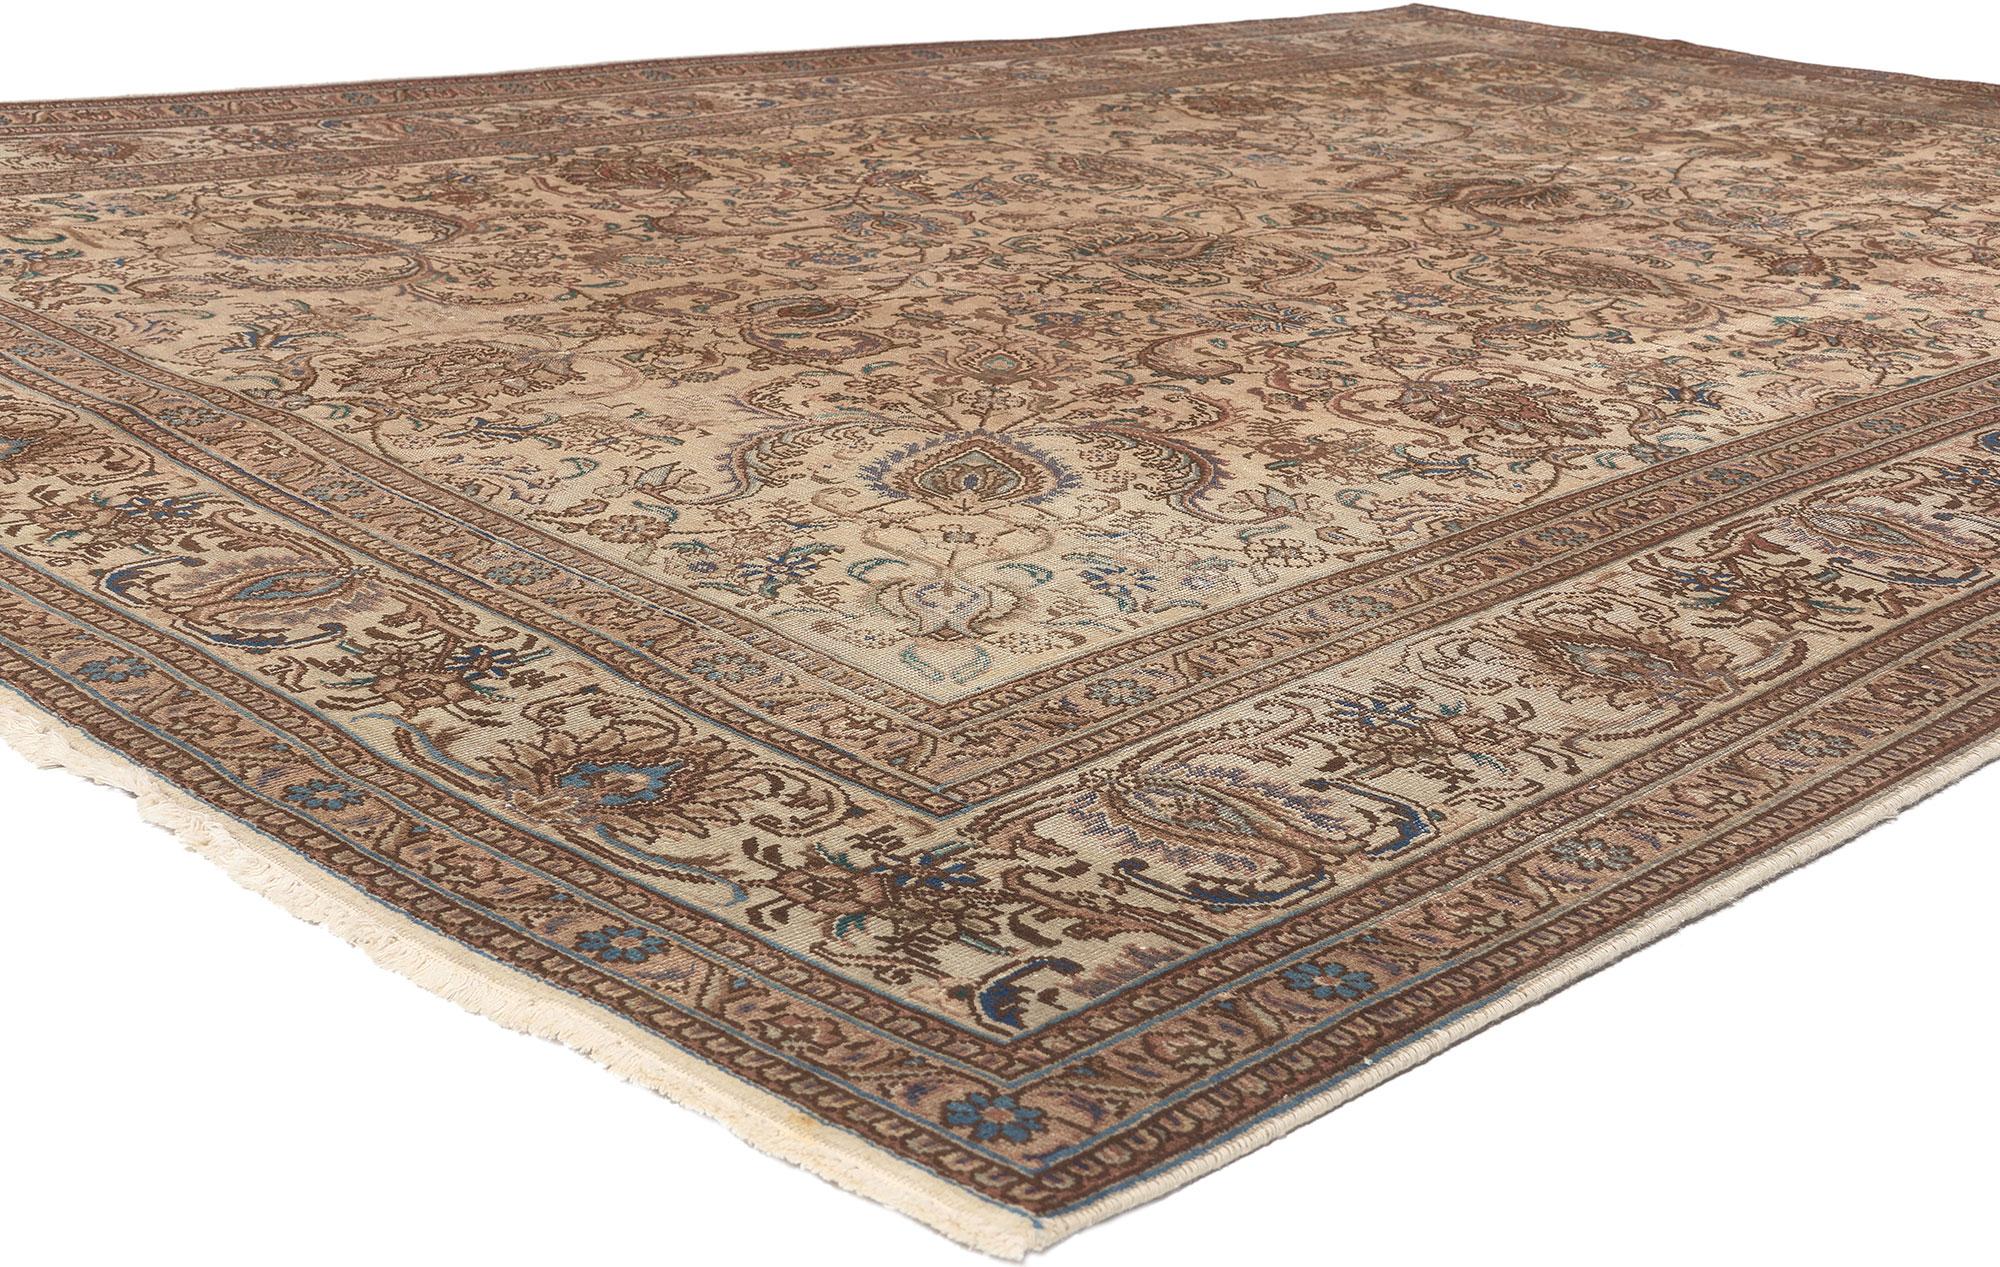 76734 Vintage Persian Tabriz Rug, 08'02 x 12'00. Colonial Revival meets Belgian Chic in this hand knotted wool vintage Persian Tabriz rug. The botanical design elements and neutral earth-tone colors in this piece emulates the timeless design and